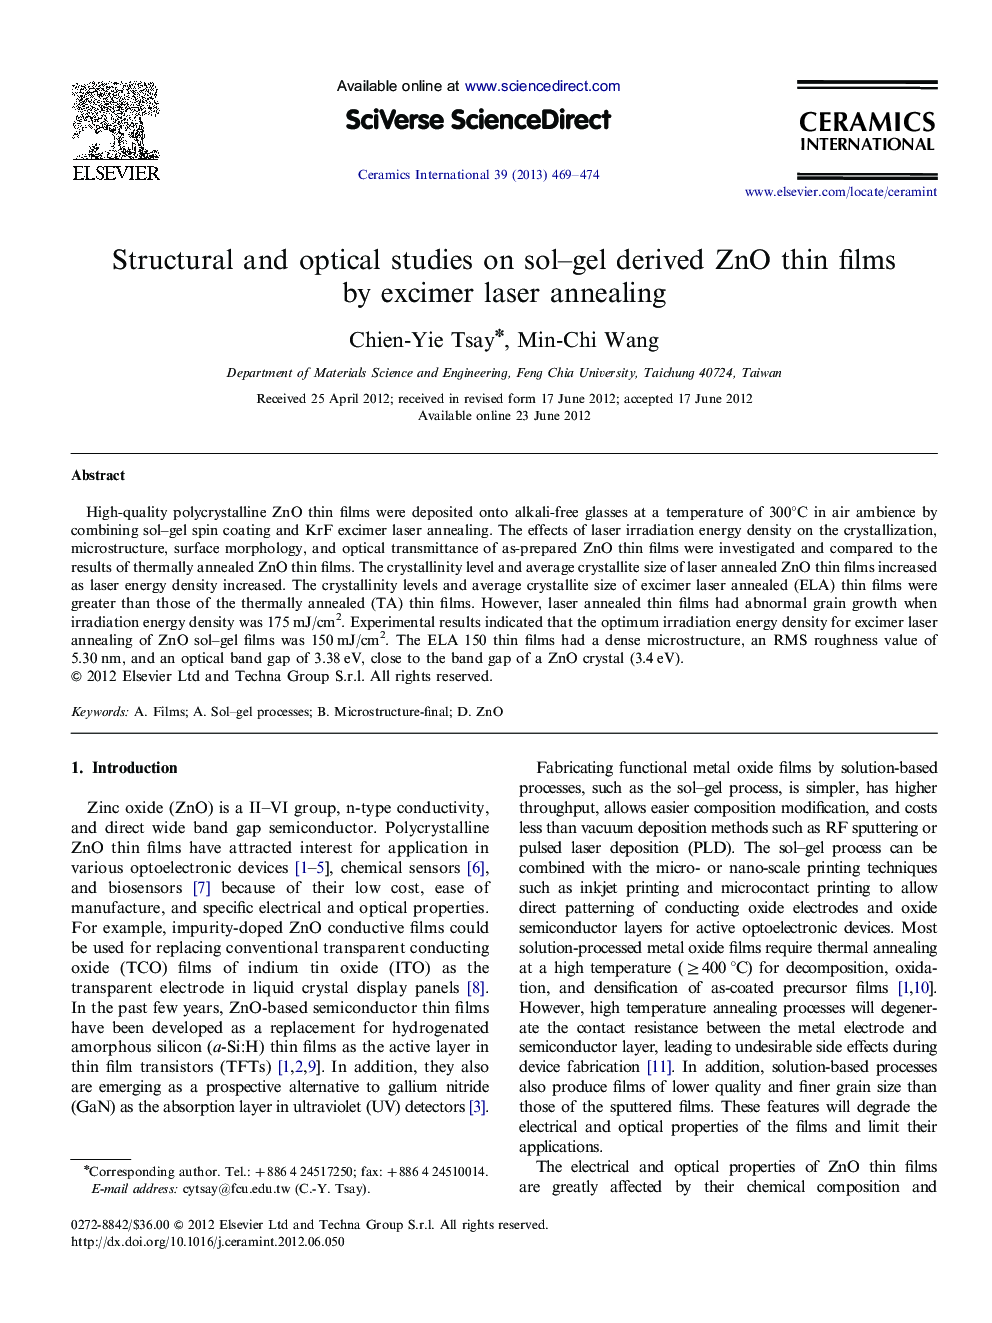 Structural and optical studies on sol–gel derived ZnO thin films by excimer laser annealing